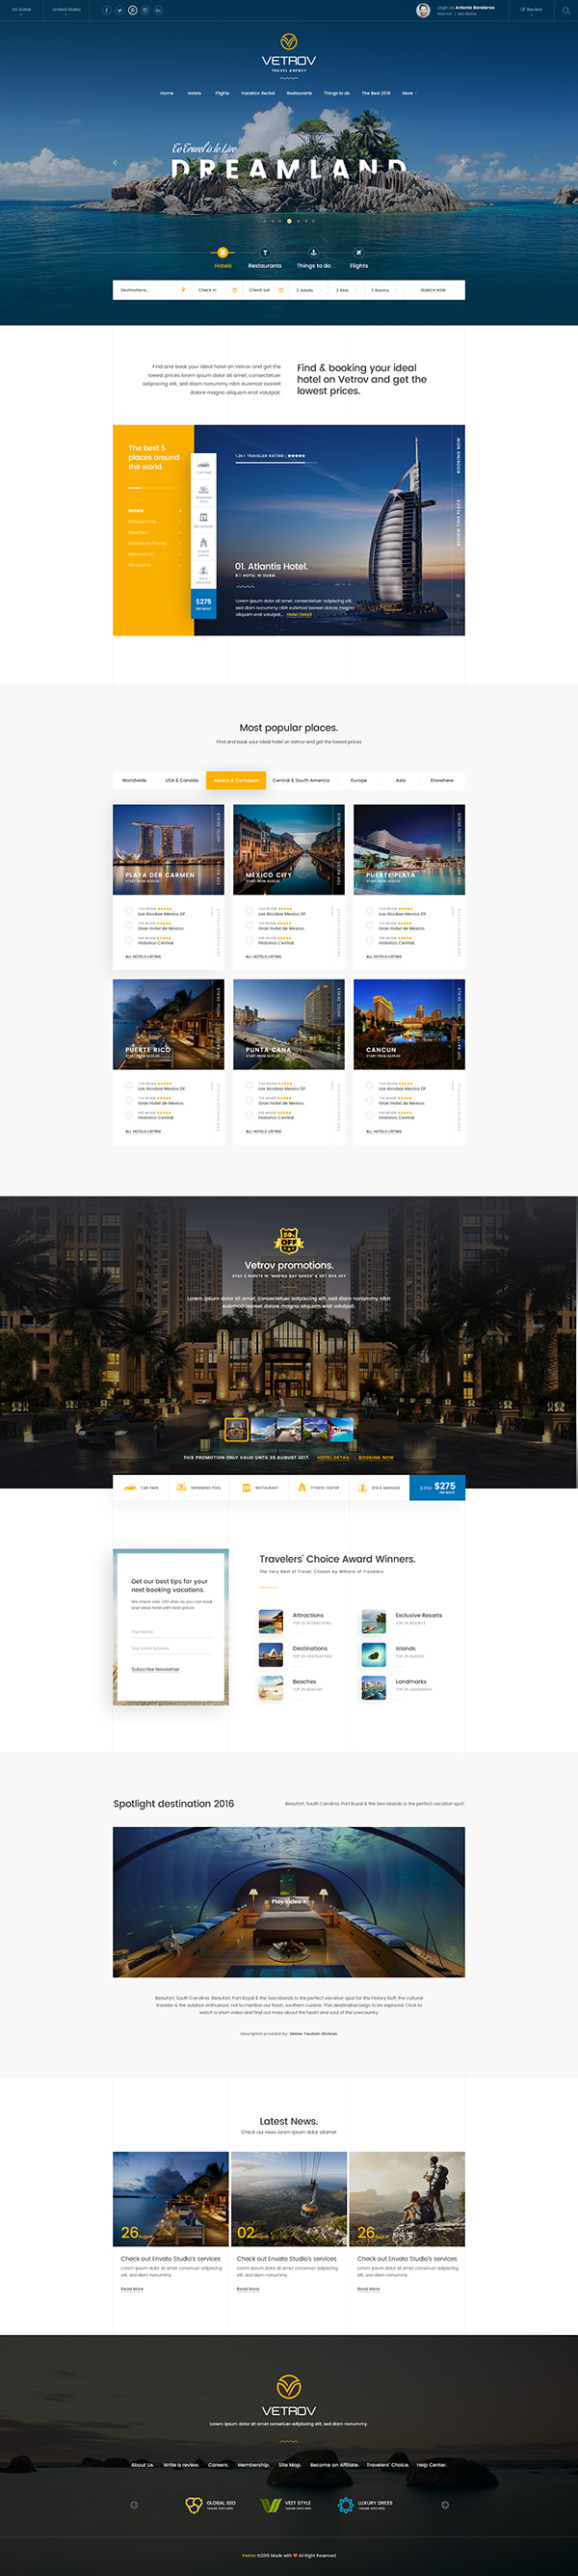 Vetrov - Hotel, Tours & Travels PSD Template